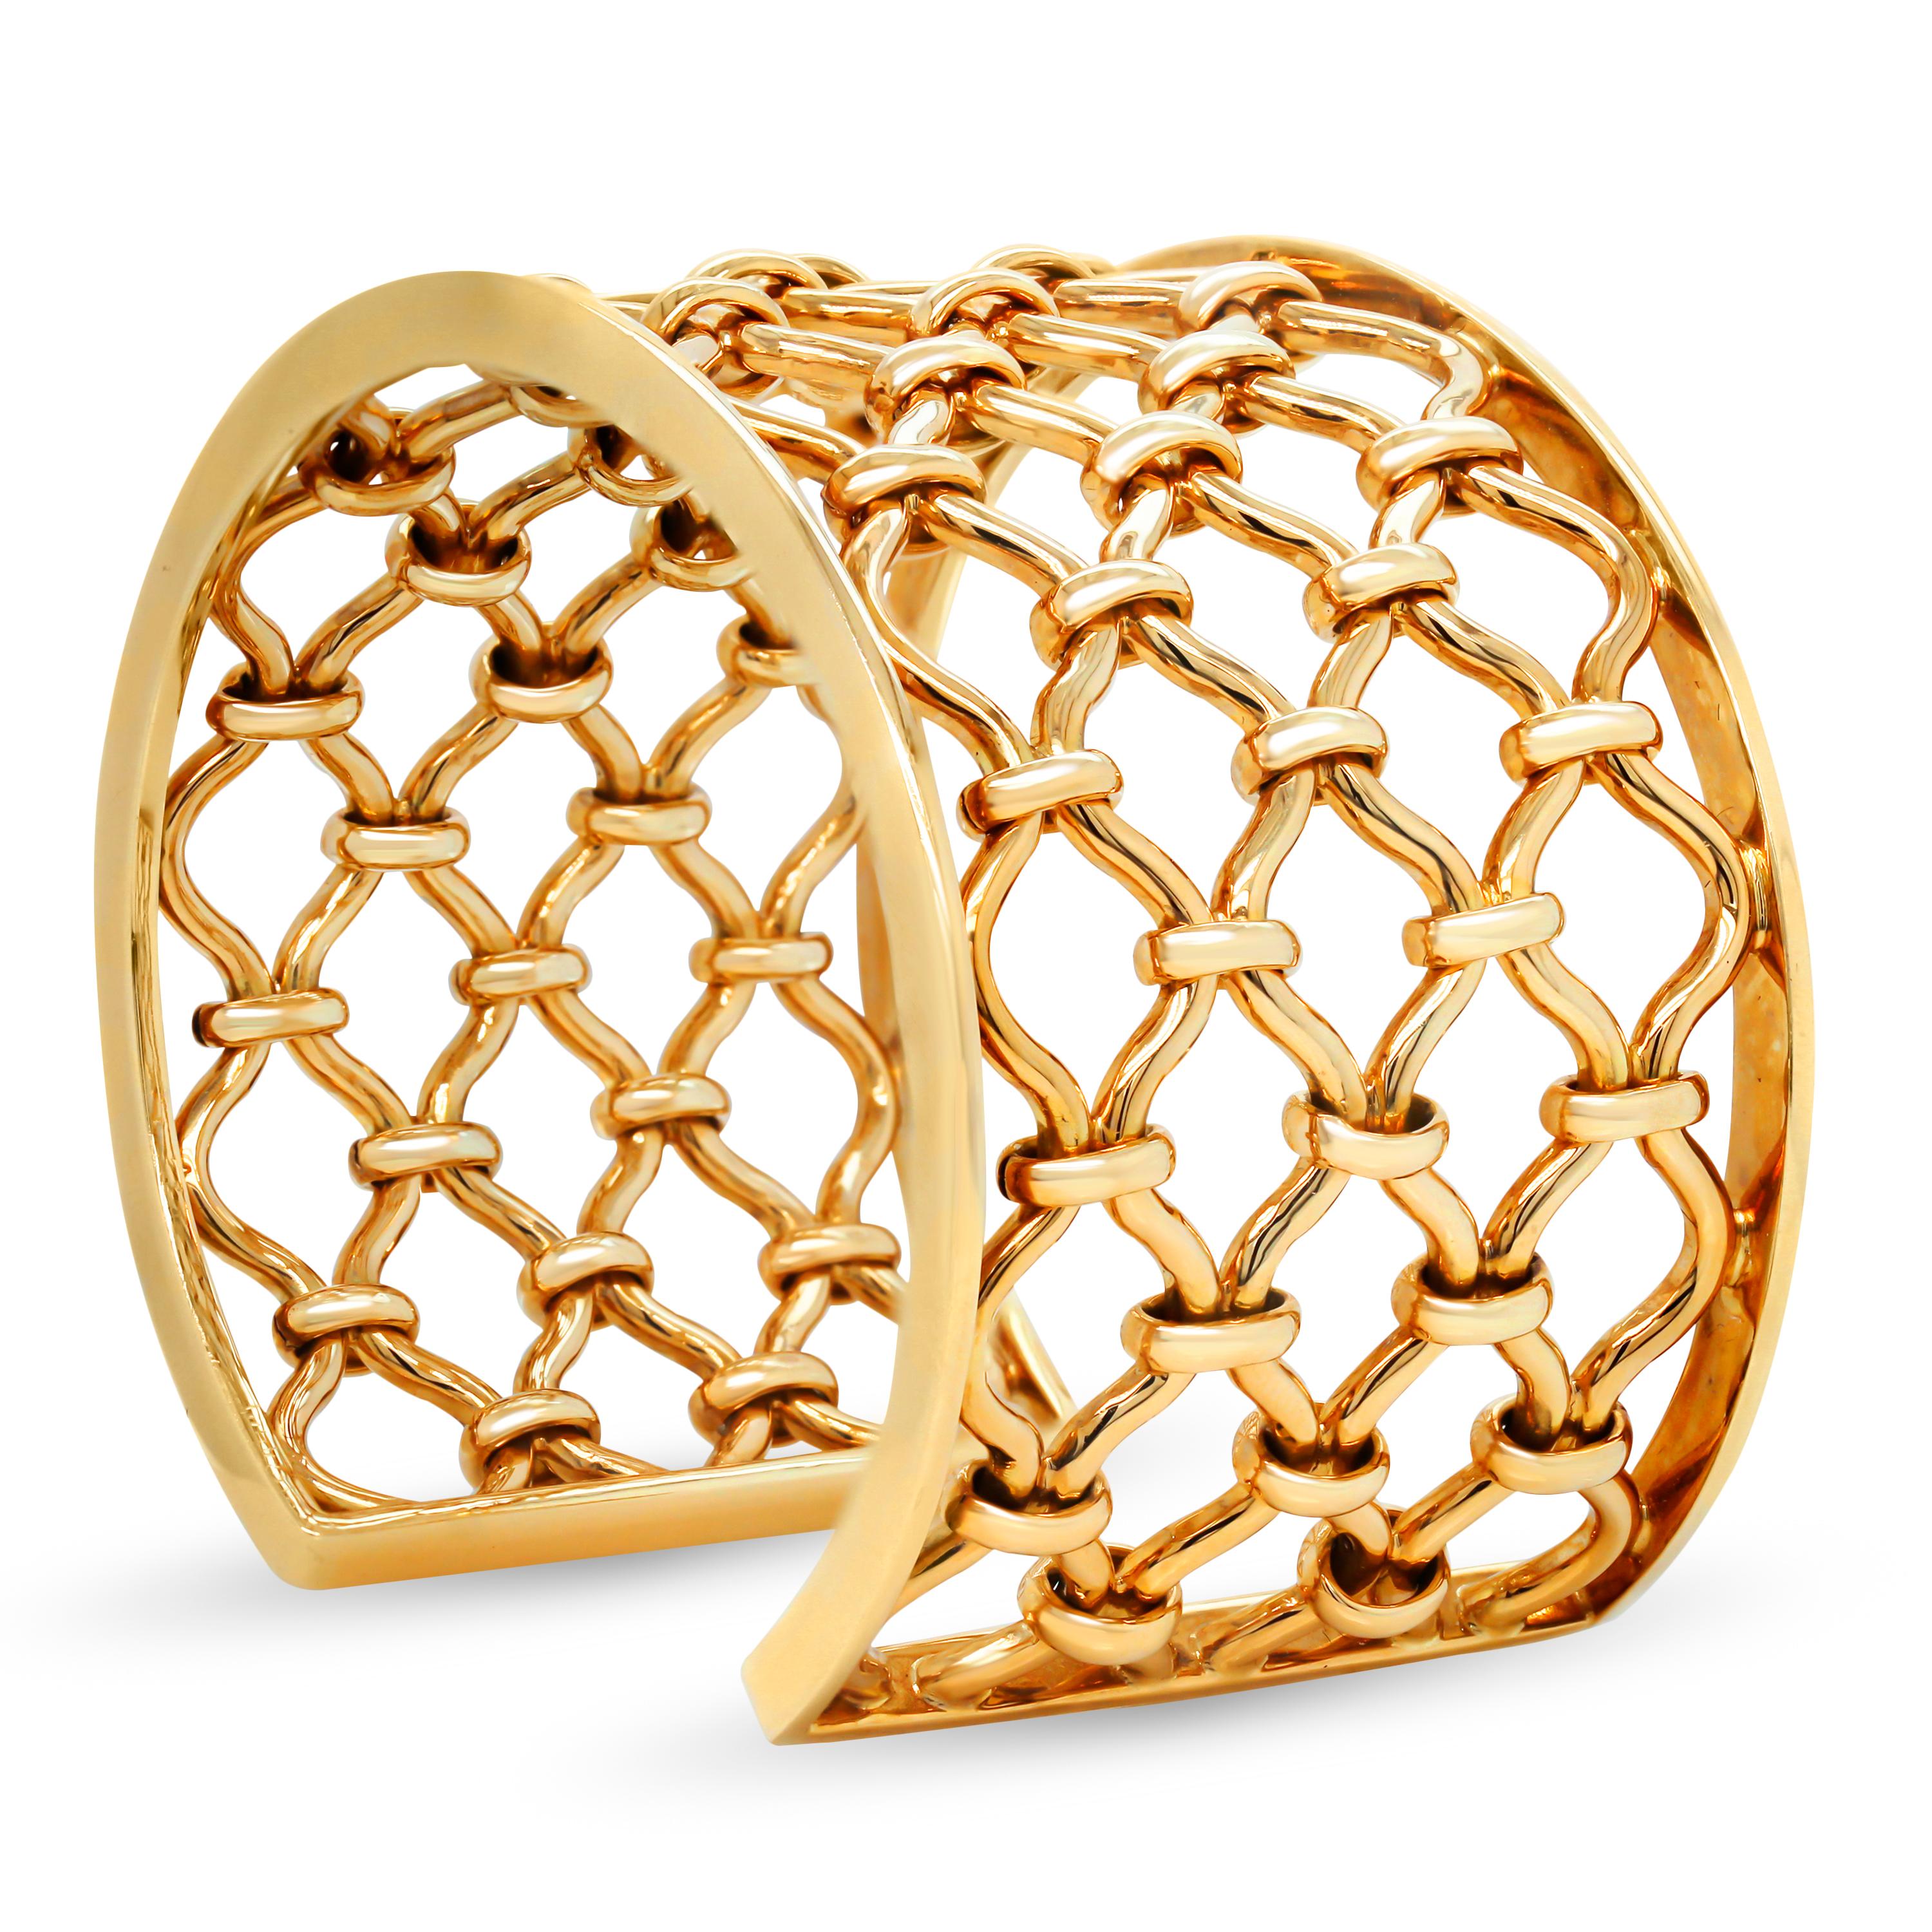 Verdura 18K Yellow Gold Basket Style Cuff Bangle Bracelet

This bracelet by Verdura features a basket-like design all throughout done entirely in 18k yellow gold.

Bracelet is a size 7. 1.40 inch width.

Signed Verdura